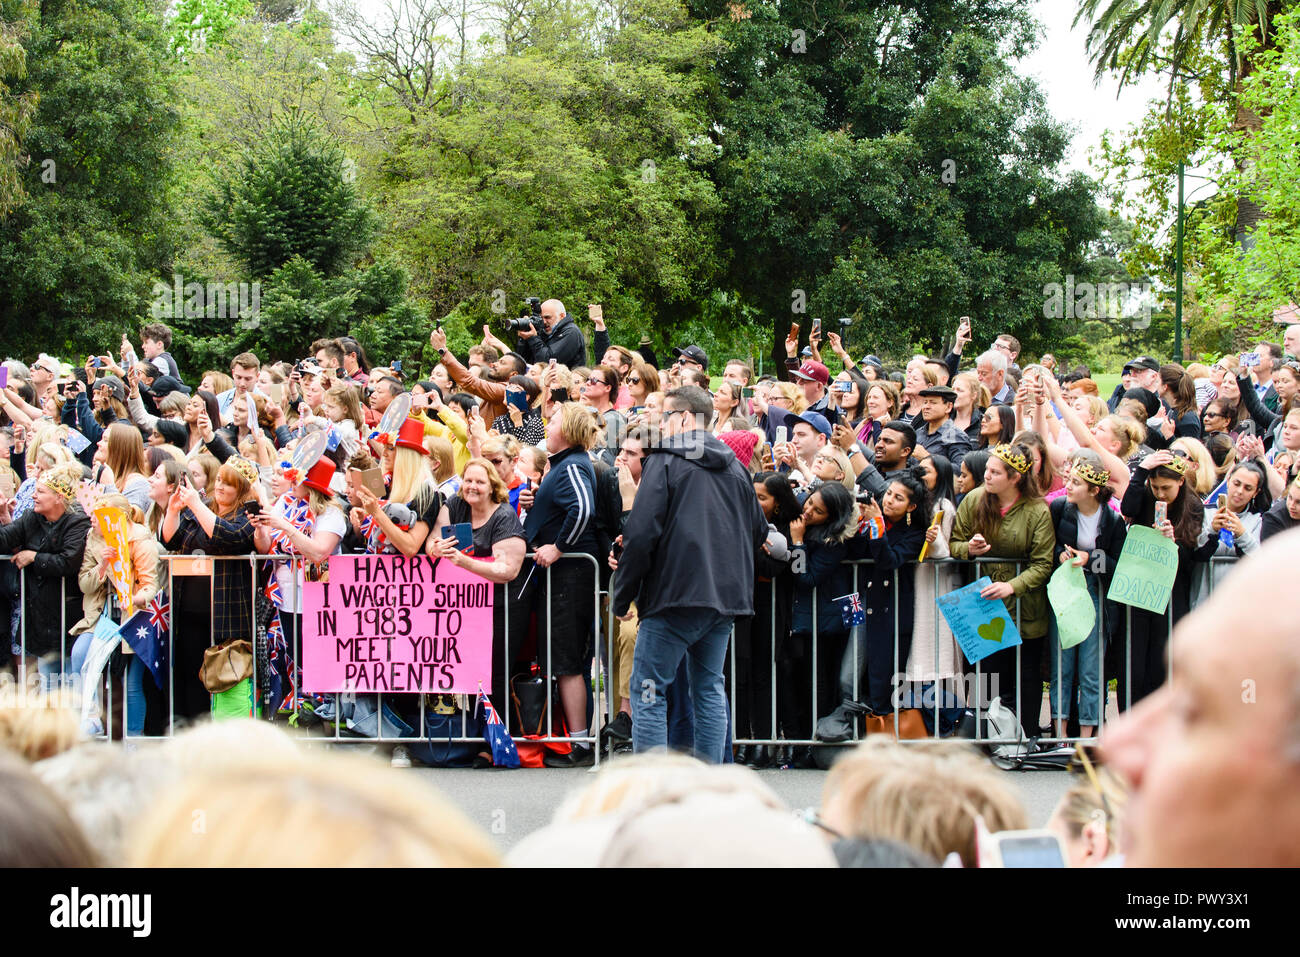 Melbourne, Australia. 18th Oct 2018. Melbourne, Australia 18th October 2018. Crowds of well wishers wait for the arrival of the Duke and Duchess of Sussex. Credit: Robyn Charnley/Alamy Live News Credit: Robyn Charnley/Alamy Live News Stock Photo